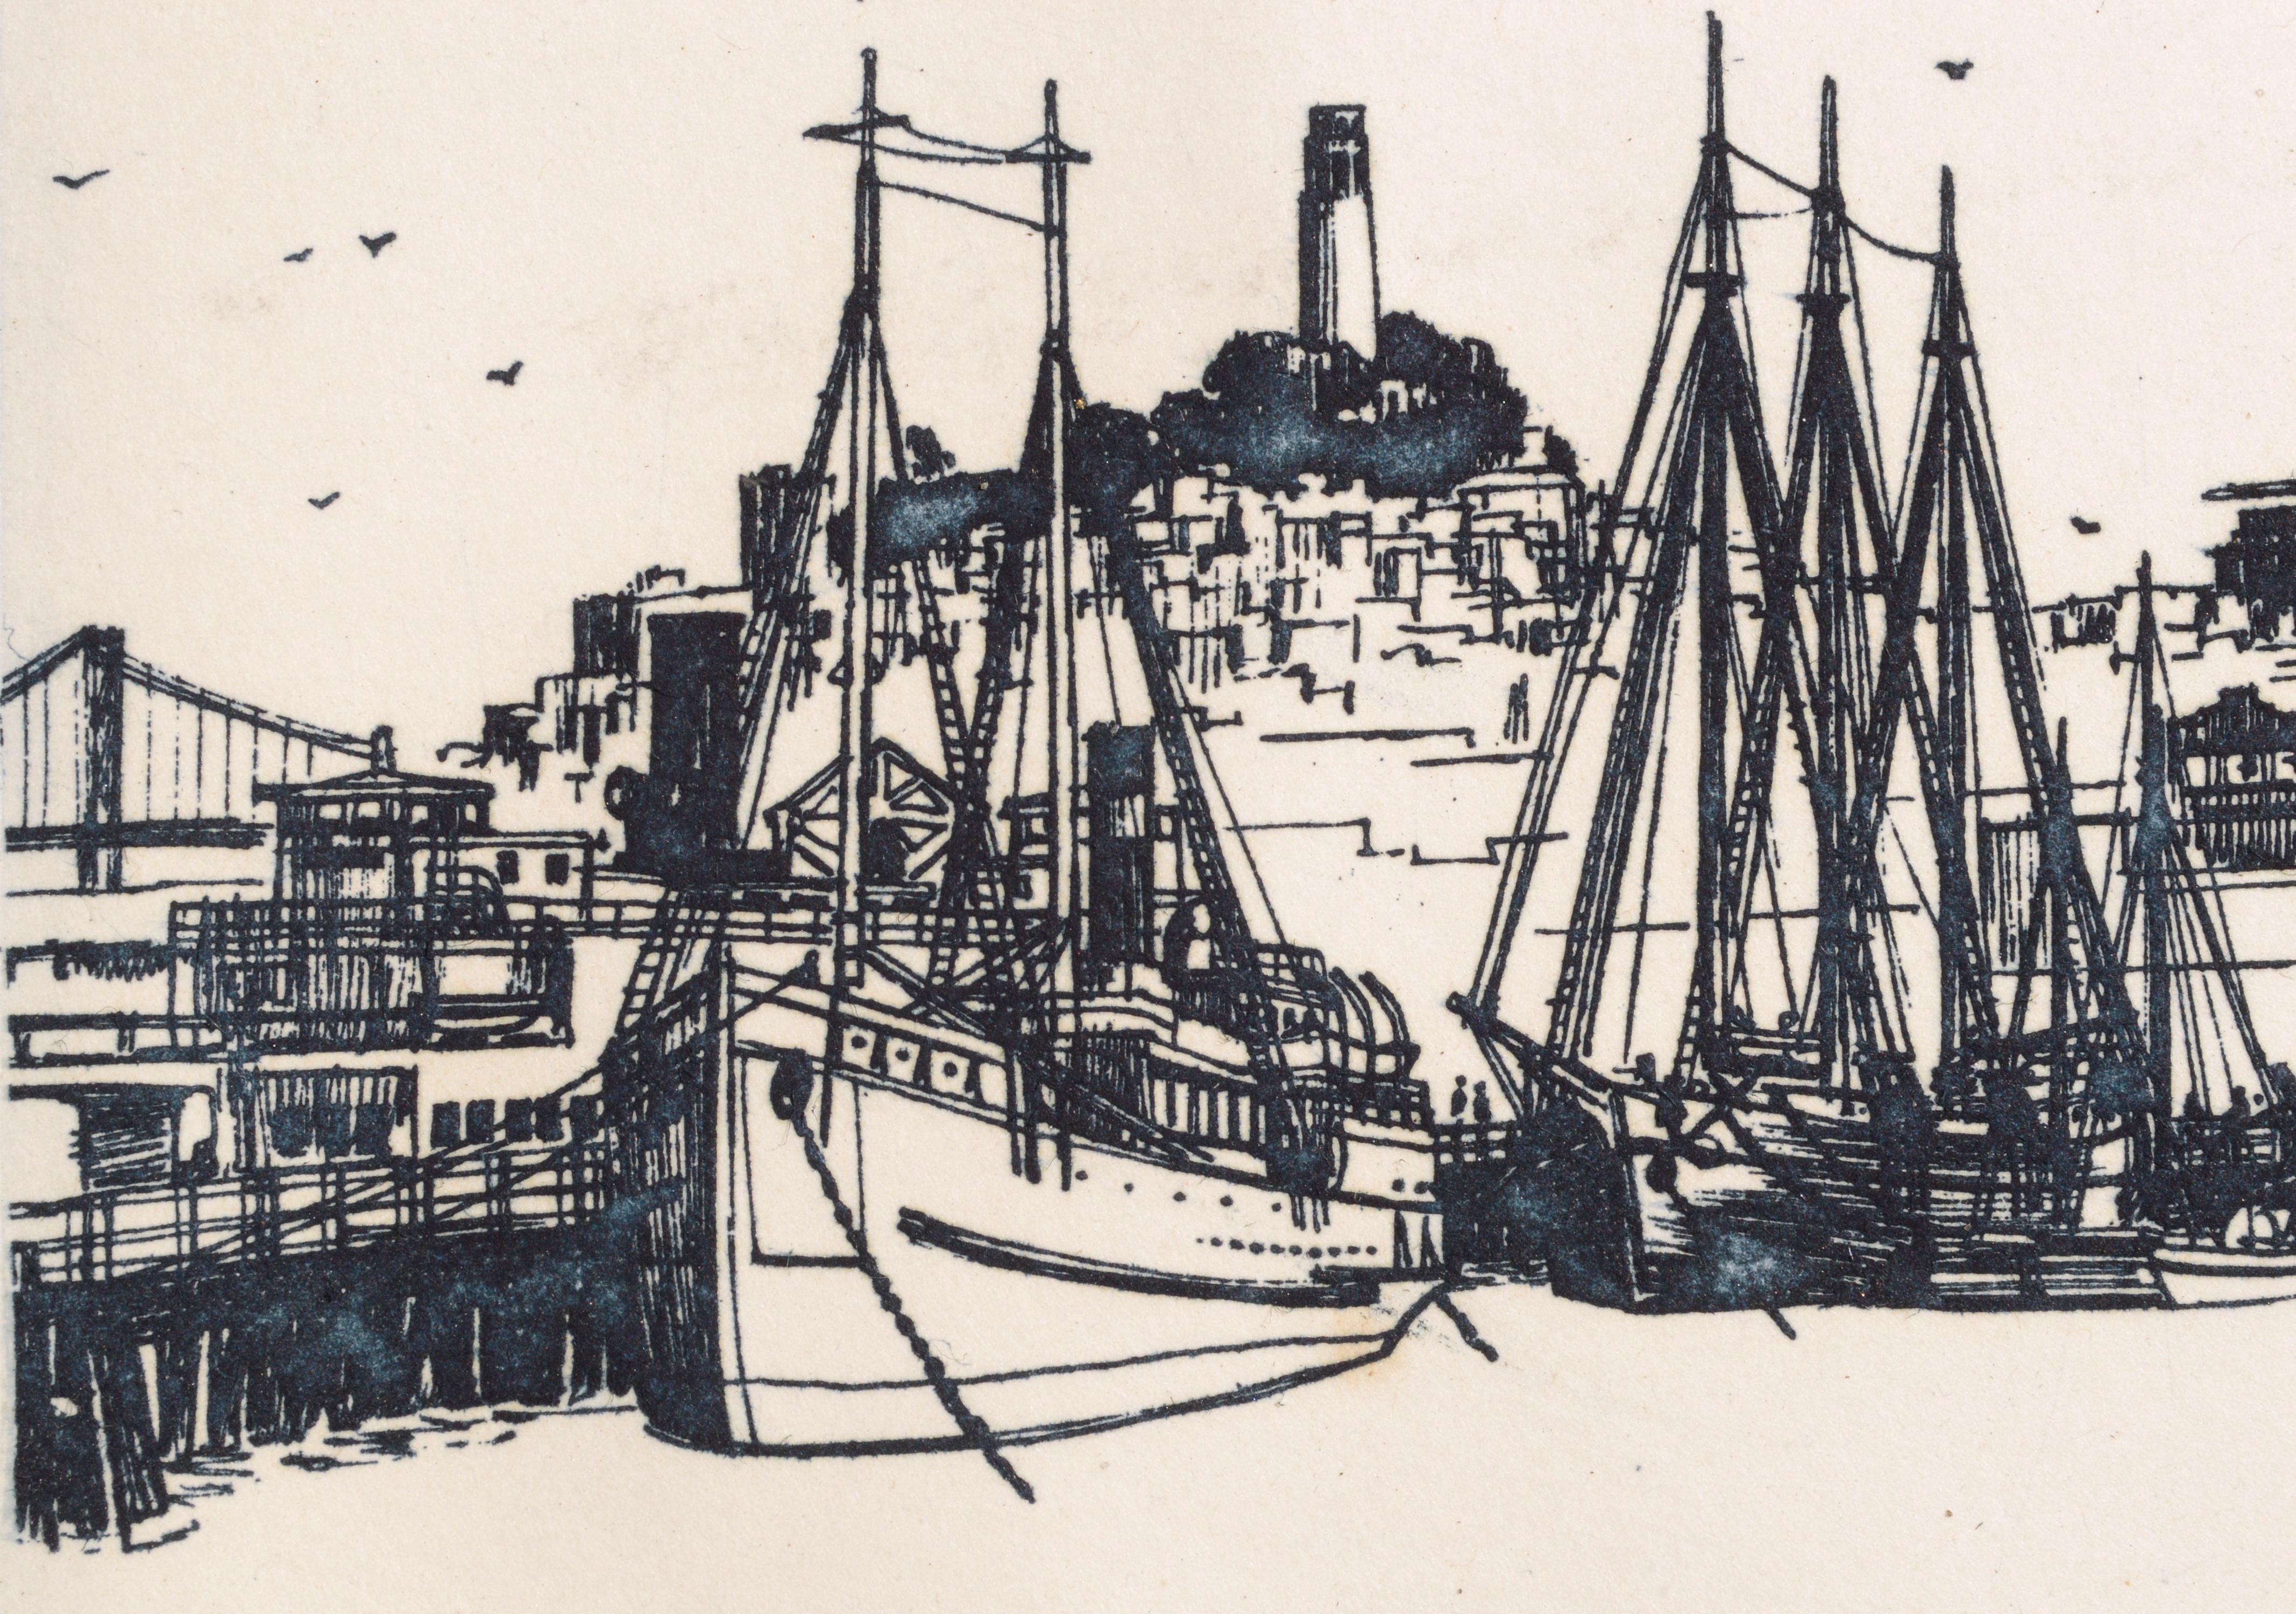 Fishing Boats in the Wharf - San Francisco Bay Area Maritime Landscape  - Contemporary Print by Unknown